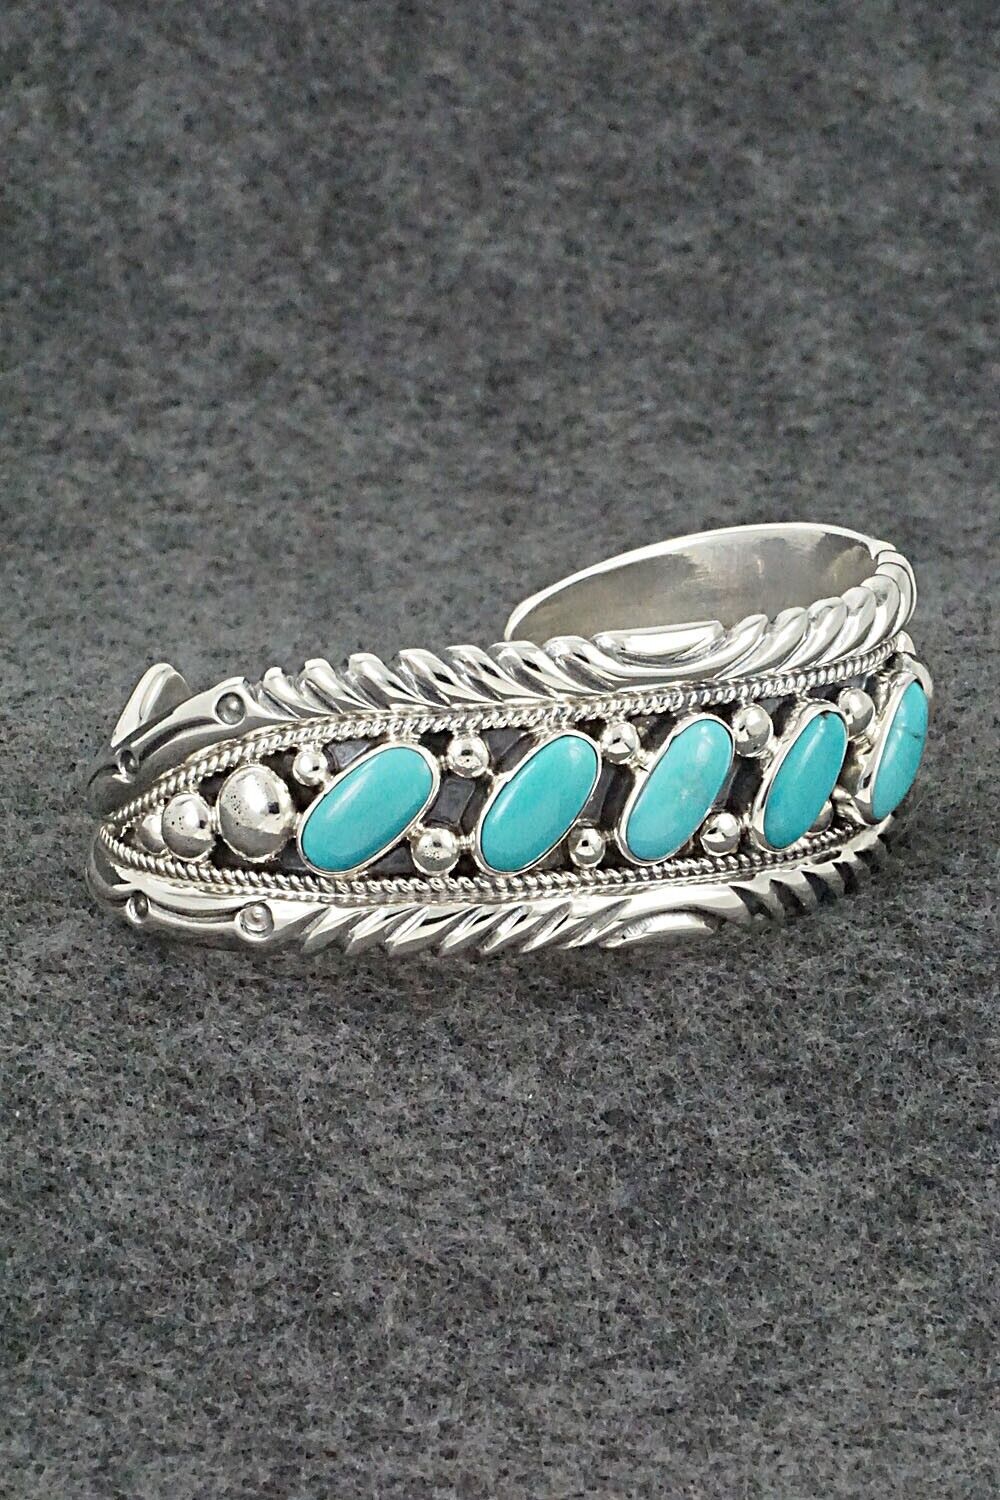 Turquoise & Sterling Silver Bracelet - Tommy Moore